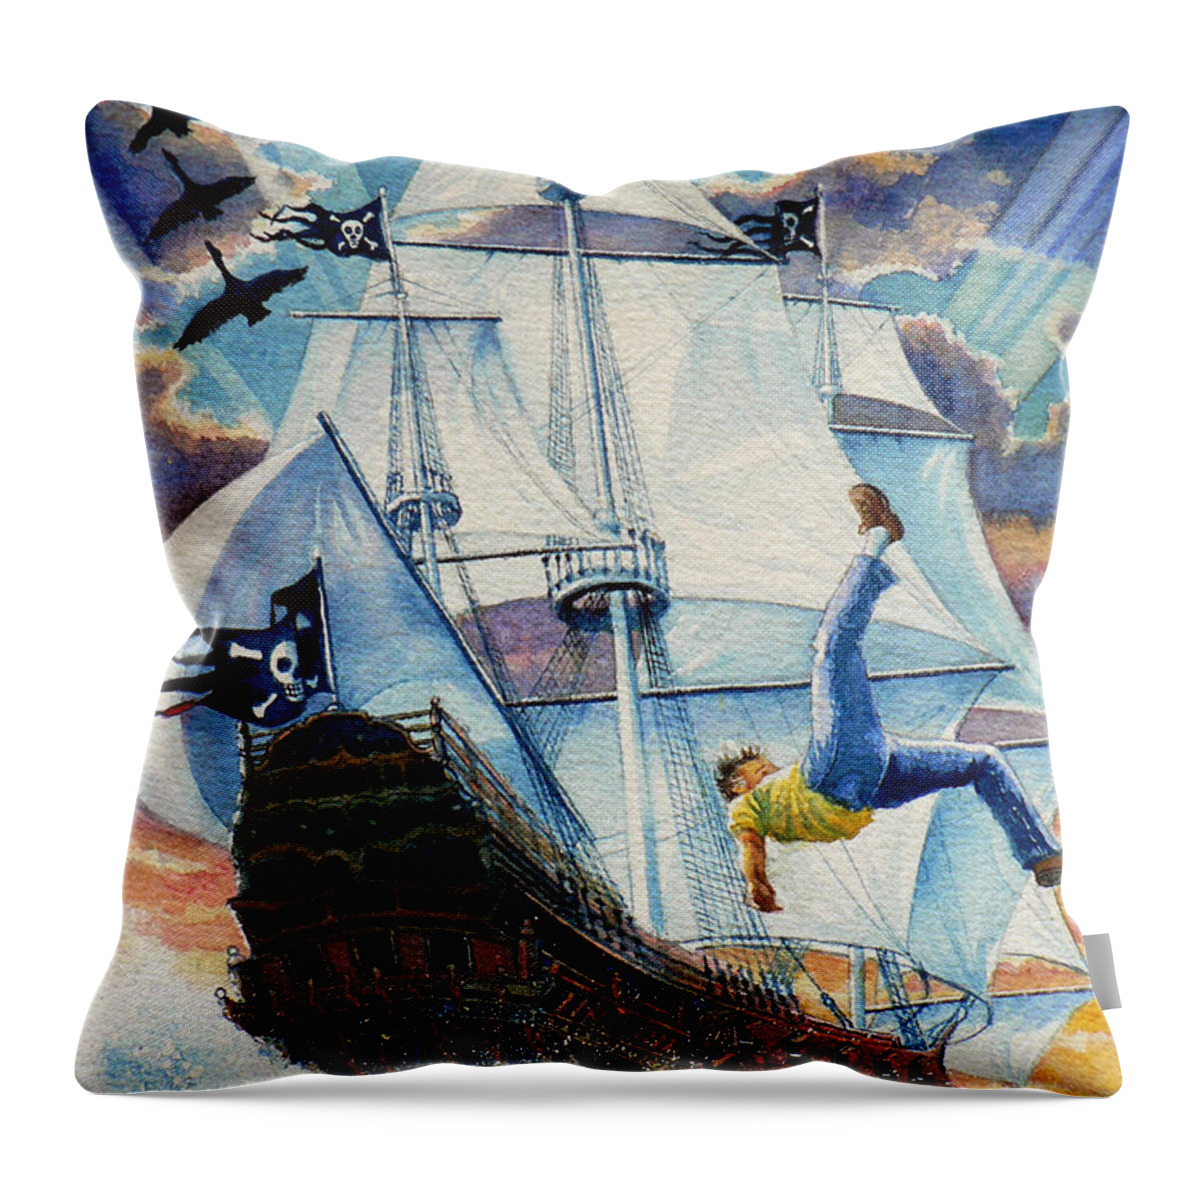 Pooka Hill Illustrations Throw Pillow featuring the painting Pooka Hill 11 by Hanne Lore Koehler